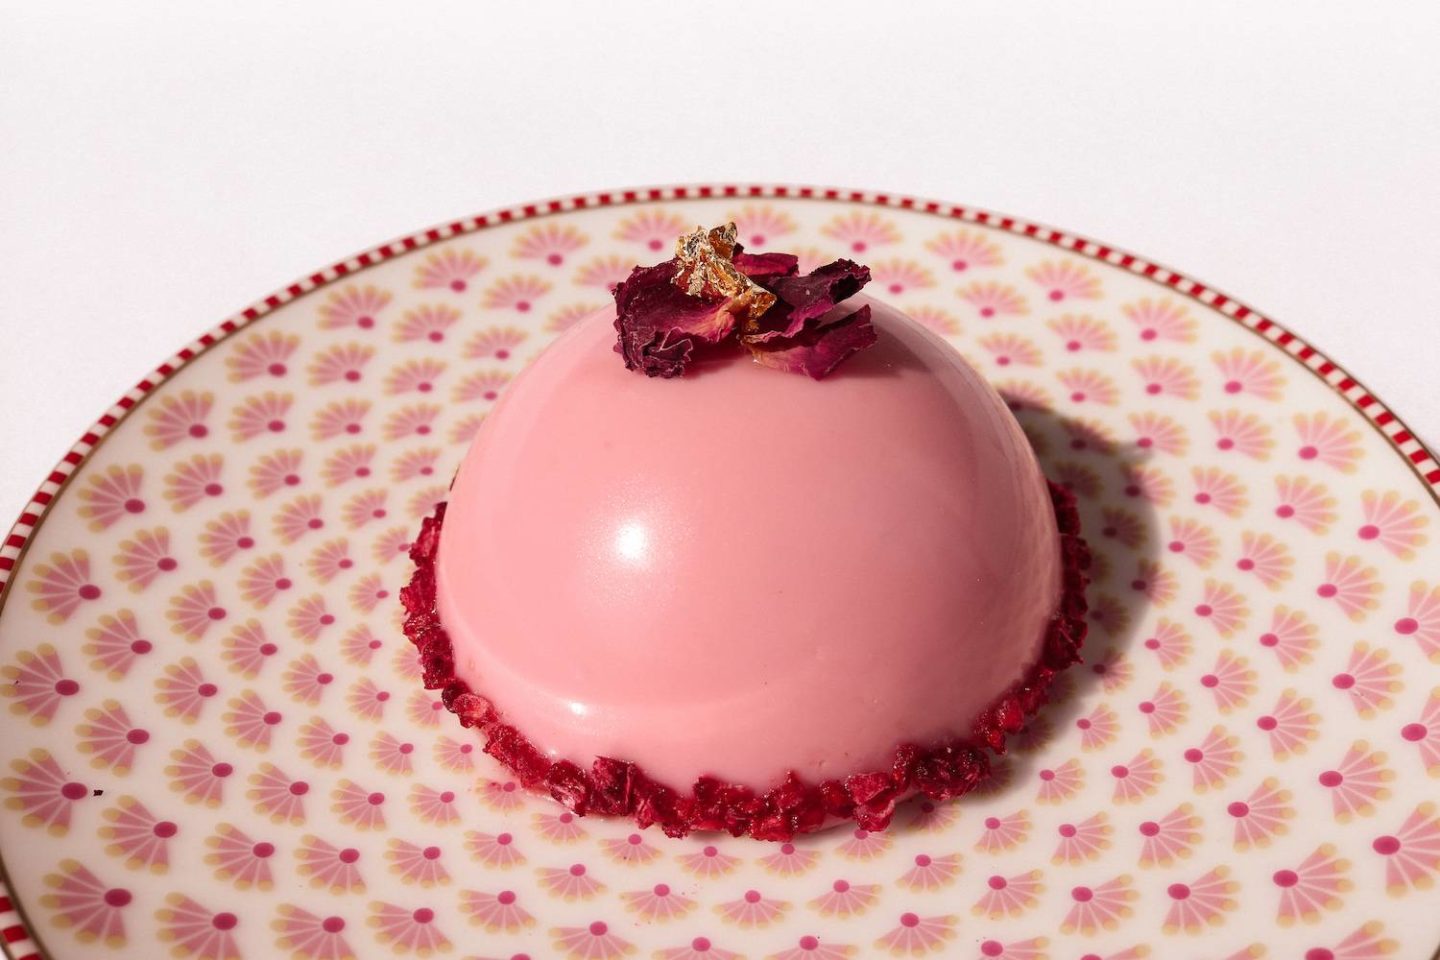 Rose & Raspberry Mousse Cake with Caramelised Pear